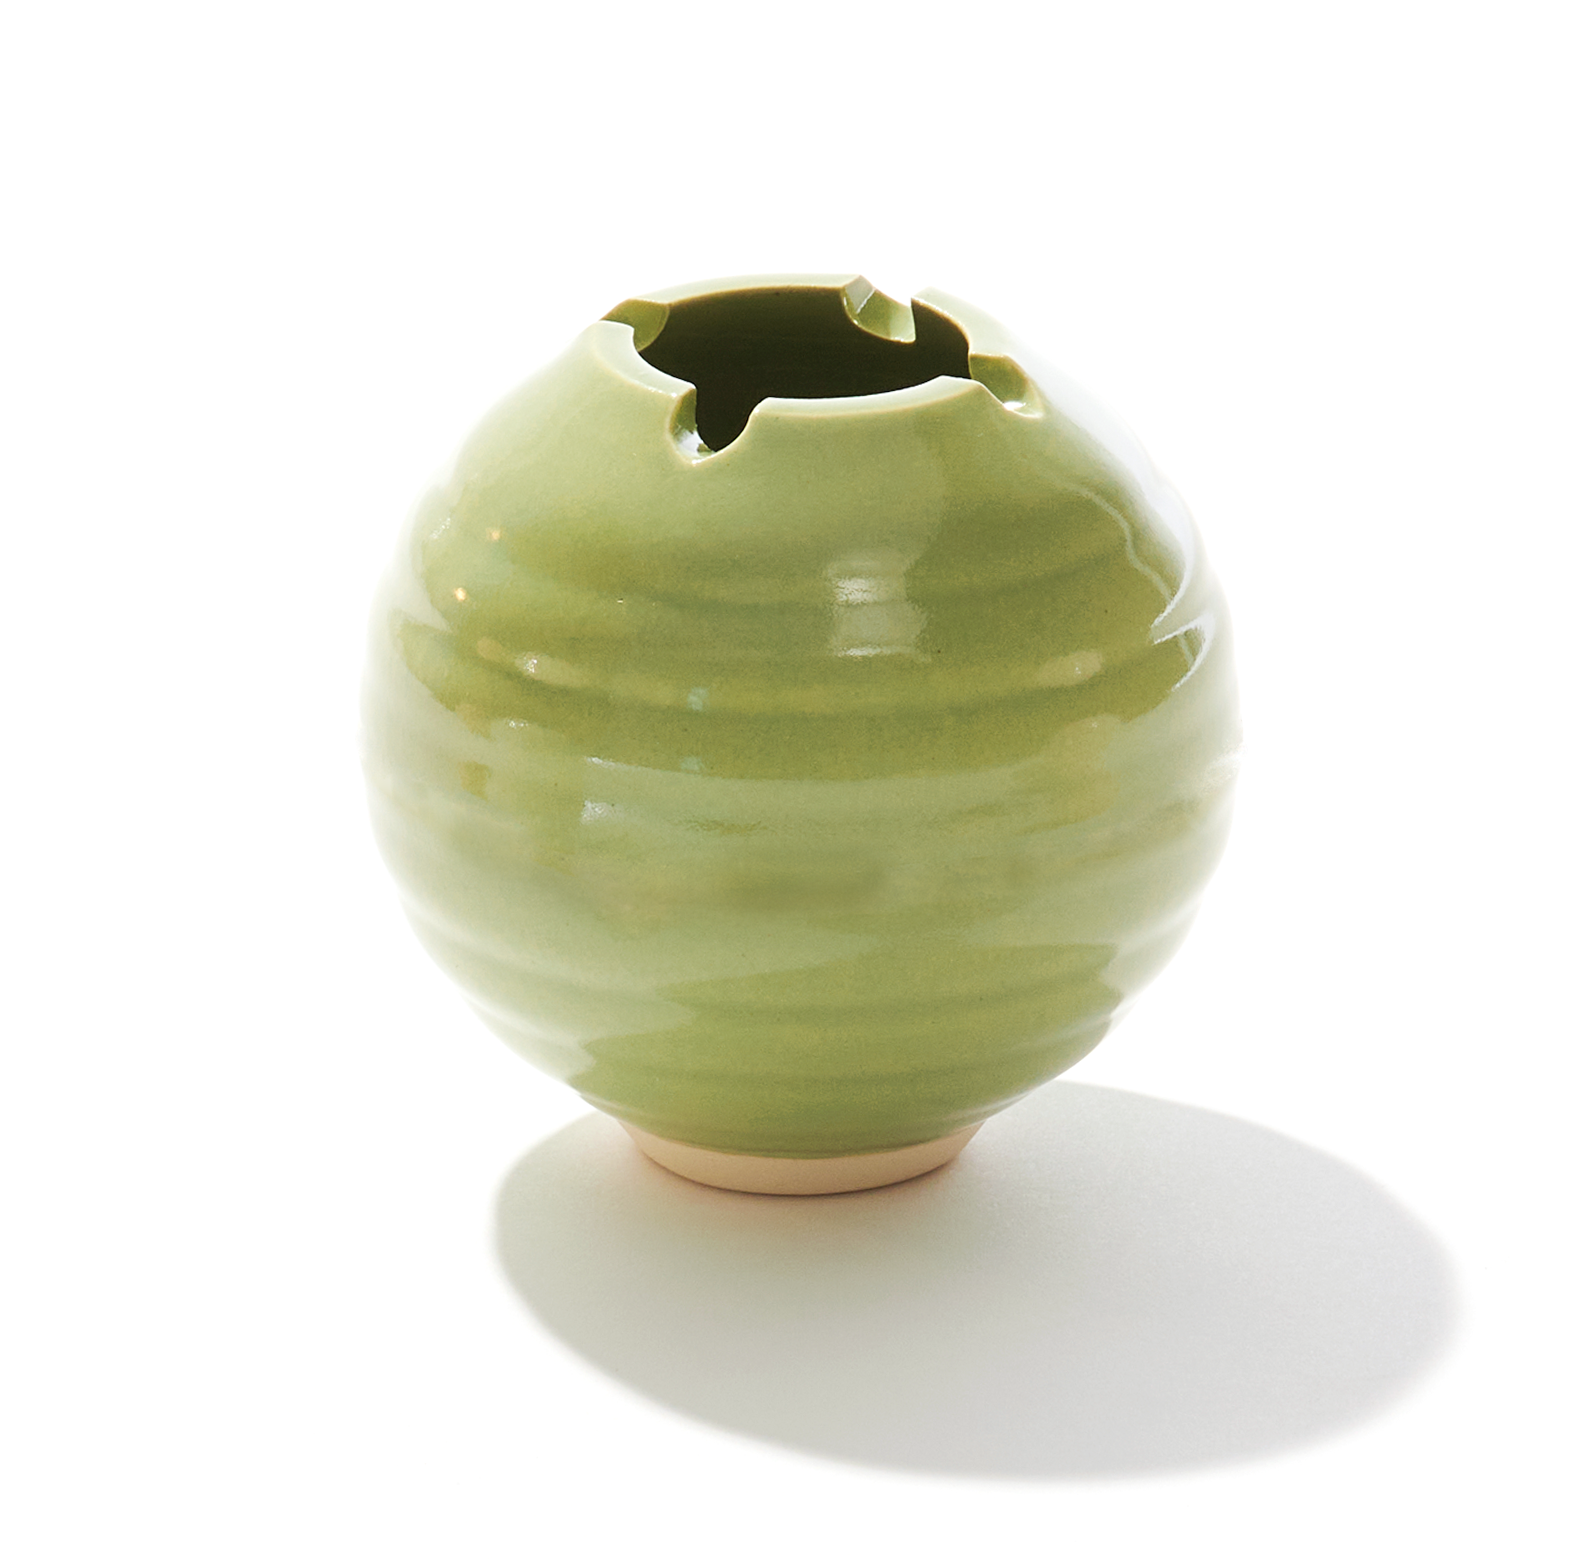 A ceramic ashtray that features a poker and a lid, this cannabis accessory is handmade by a woman-owned studio in the USA. The Orb in green comfortably fits in your hand and doubles as art in your home with a secure fit lid. The Orb ashtray is a discreet cannabis accessory to use while using your favorite bud products.